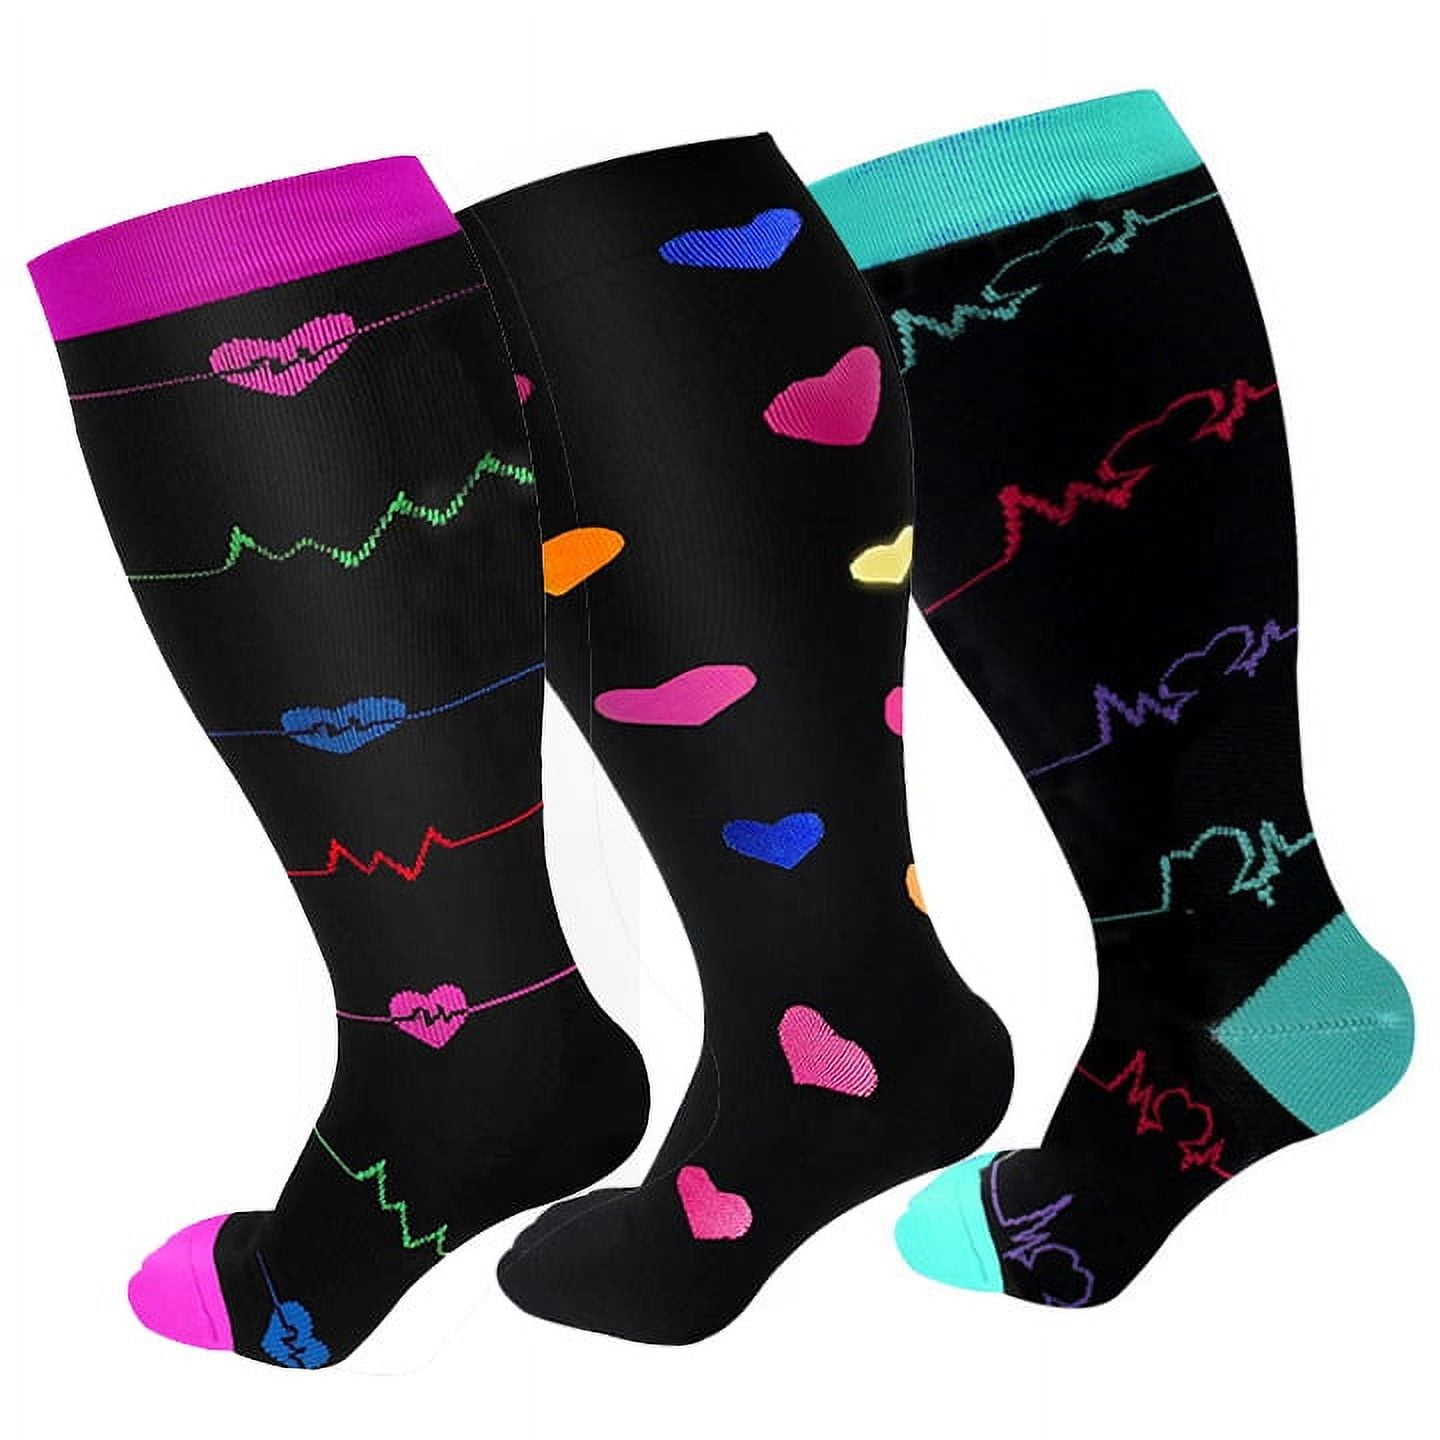 3XL Compression Socks for Men Women Wide Calf Knee High Length Compression  Stockings for All Day Wear Better Blood Flow Swelling Circulation Support  Socks for Nurse Pregnant Running Aosijia ChYoung 